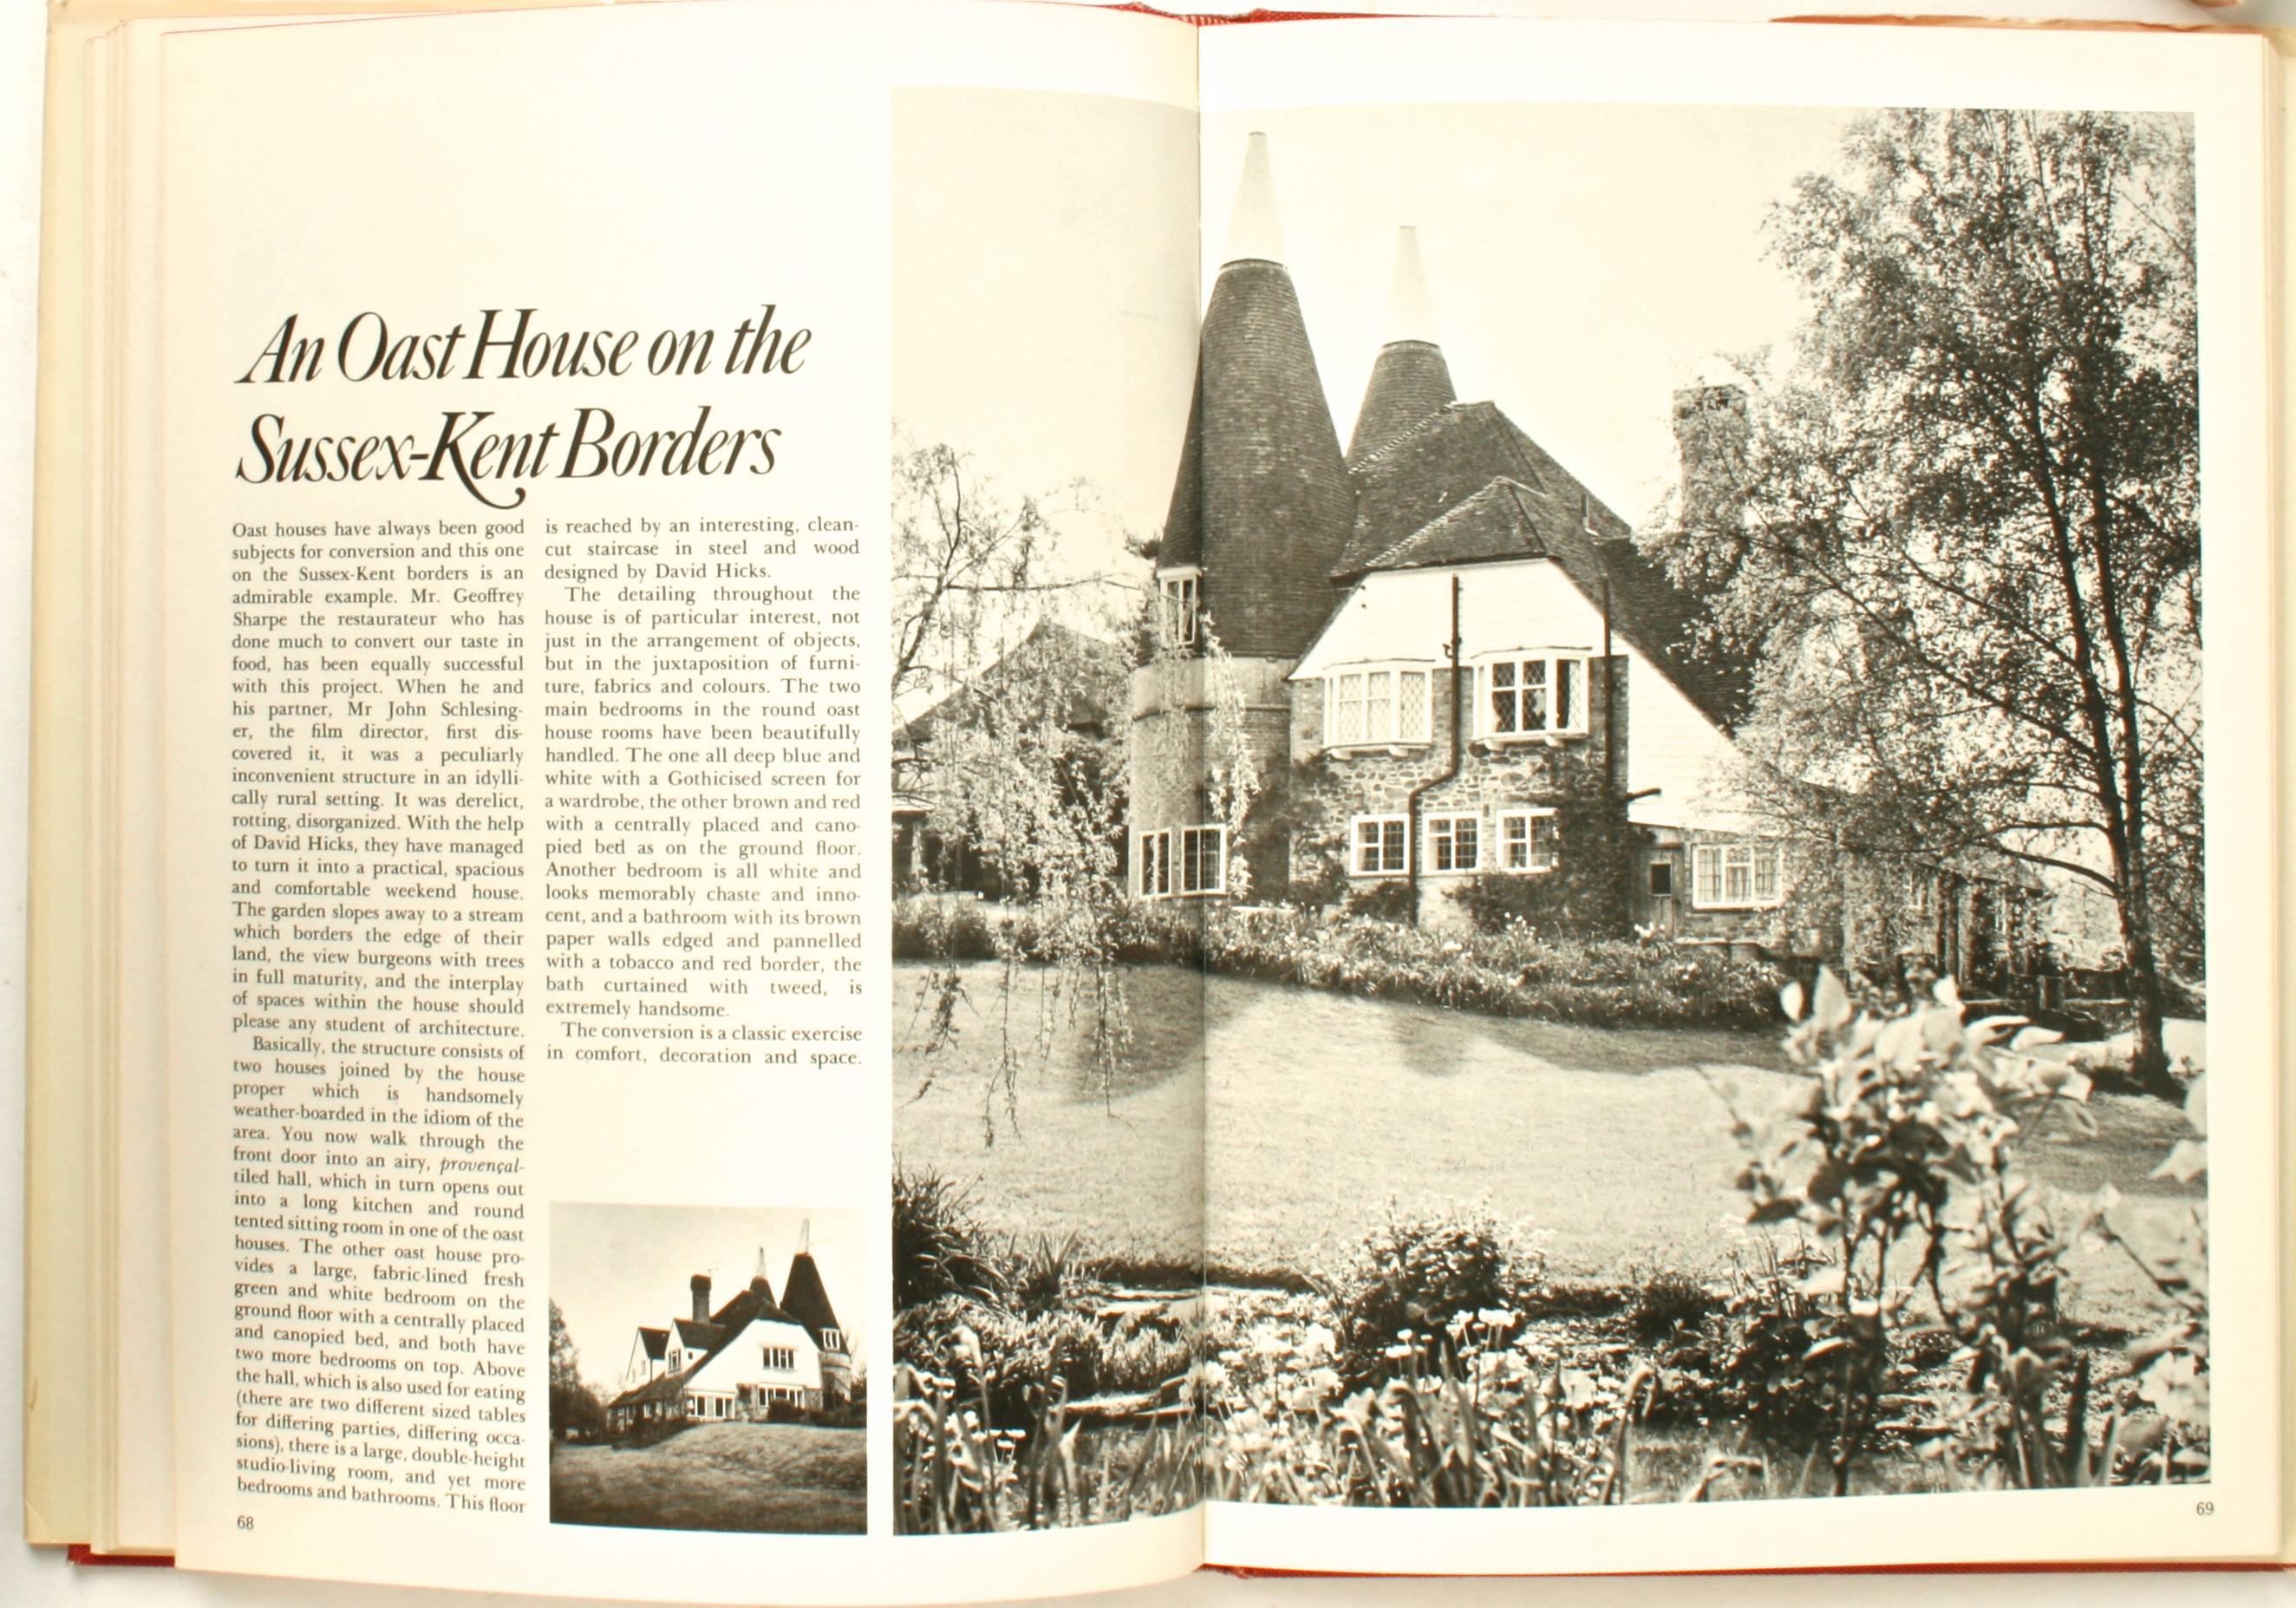 A House in the Country, The Second Home from Cottages to Castles by Mary Gilliat. London: Hutchinson & Co. Publishers LTD. First edition hardcover with dust jacket, 1973. 160 pp. A review of revamped English and Irish cottages, barns, farmhouses,